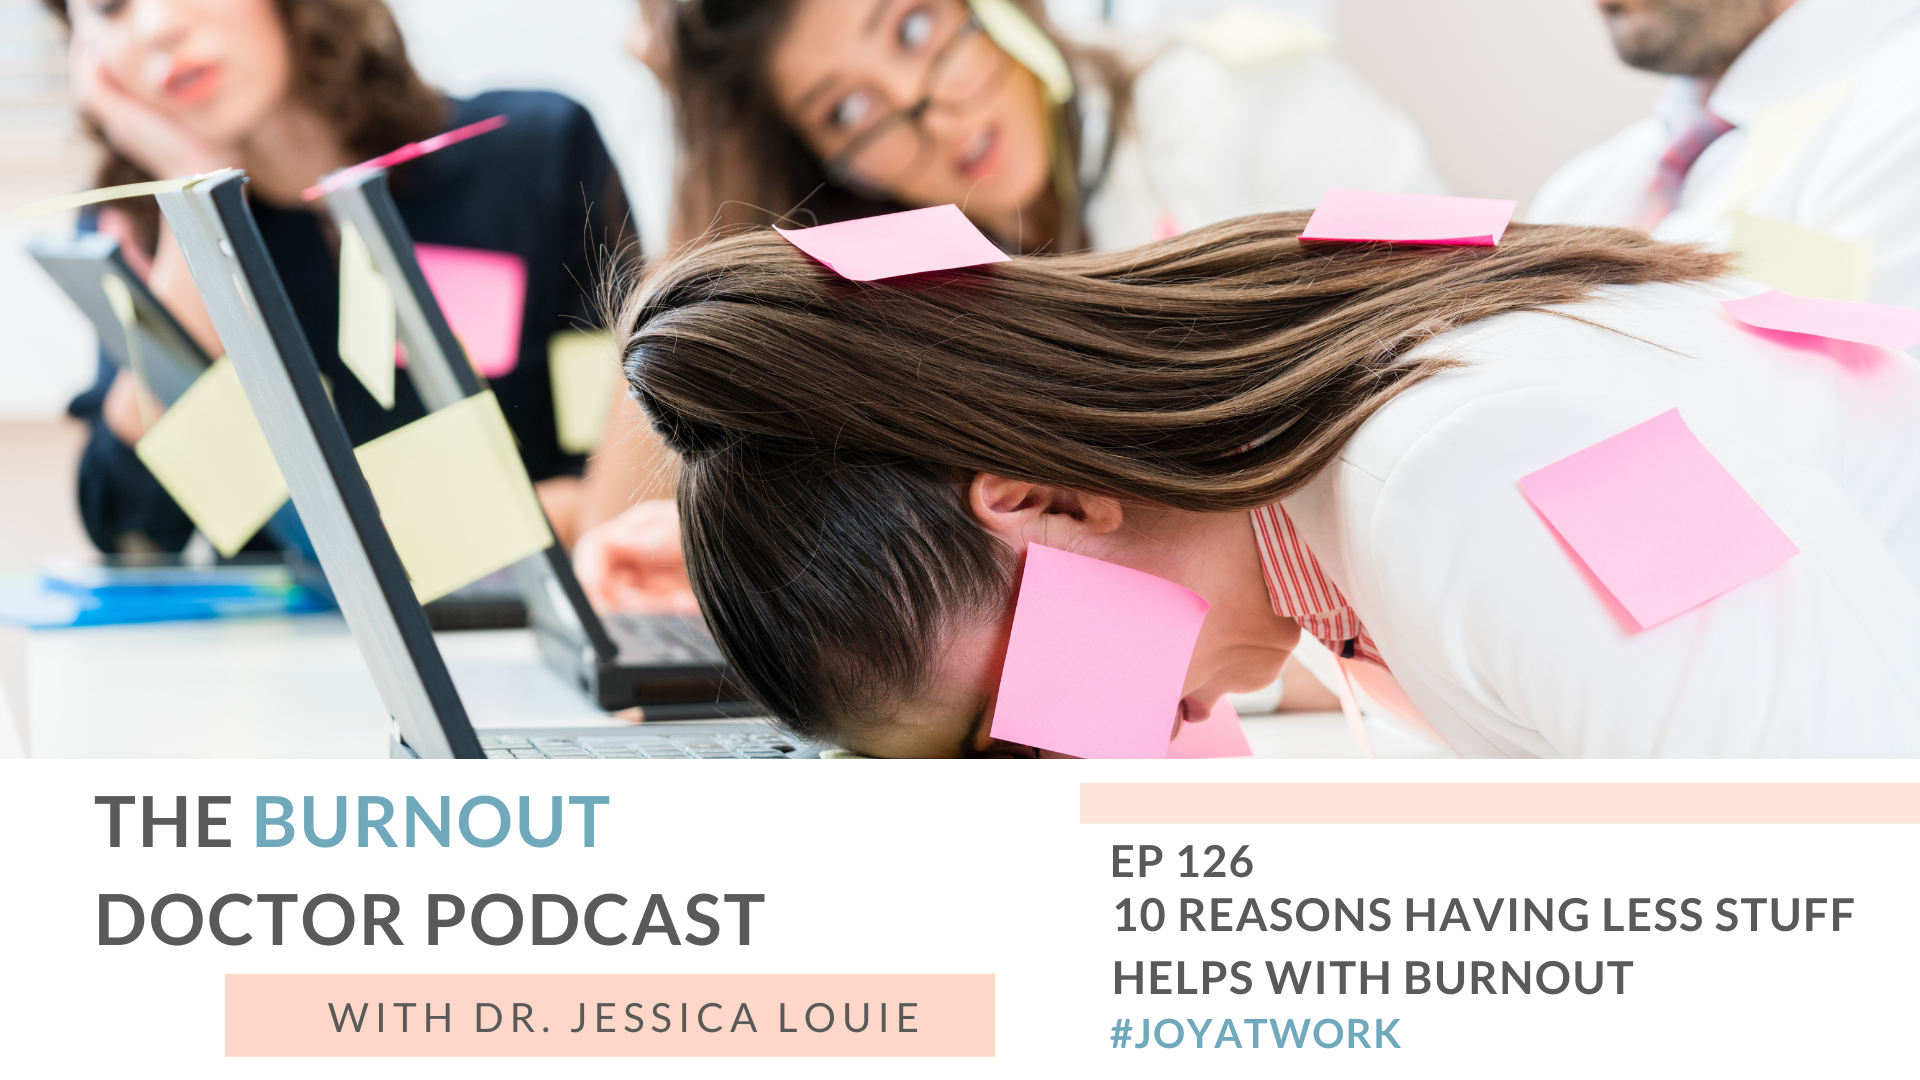 10 reasons having less stuff helps with burnout, stress and depression. minimalism and stress. minimalism and burnout. The Burnout Doctor Podcast. KonMari Method.